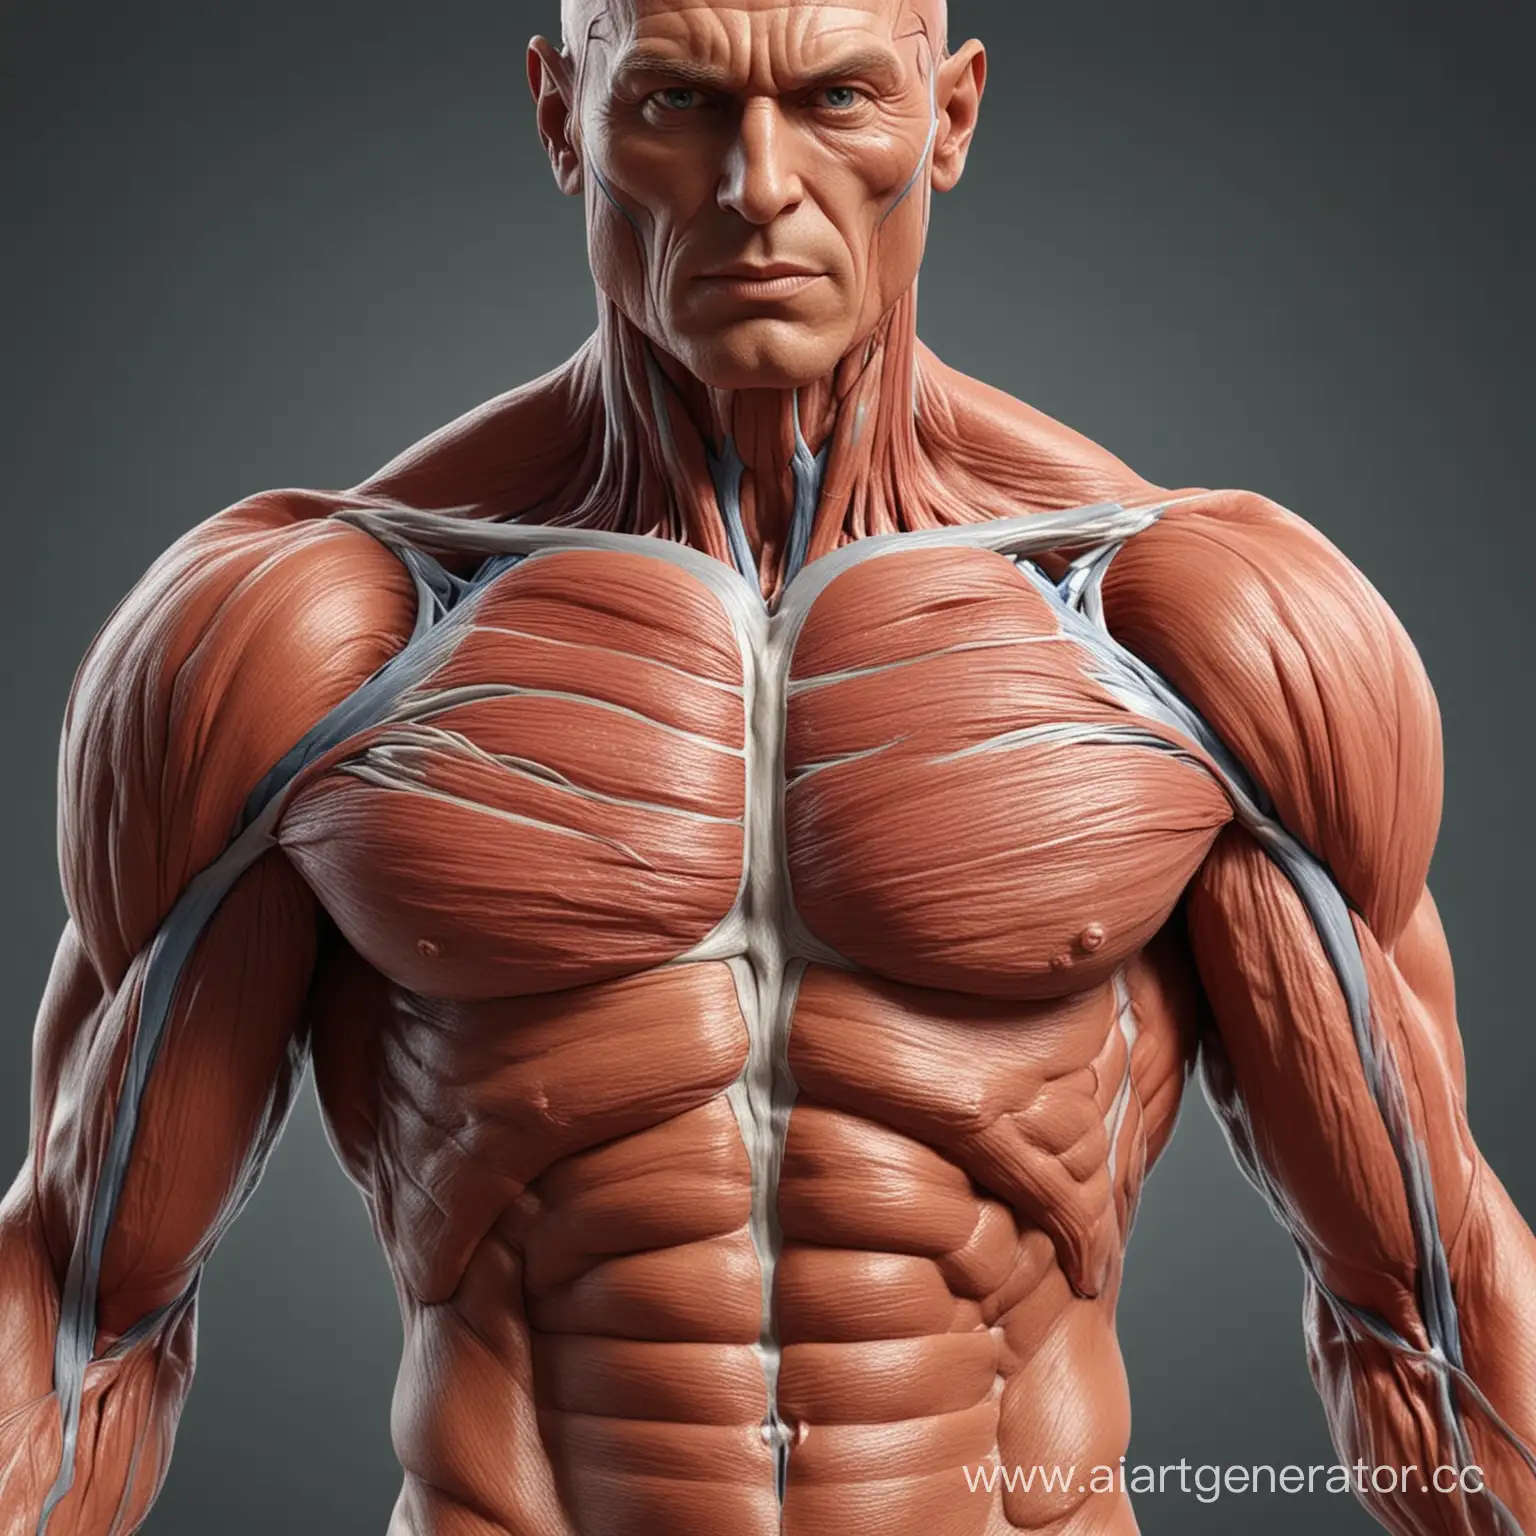 Detailed-3D-Rendering-of-Human-Muscular-System